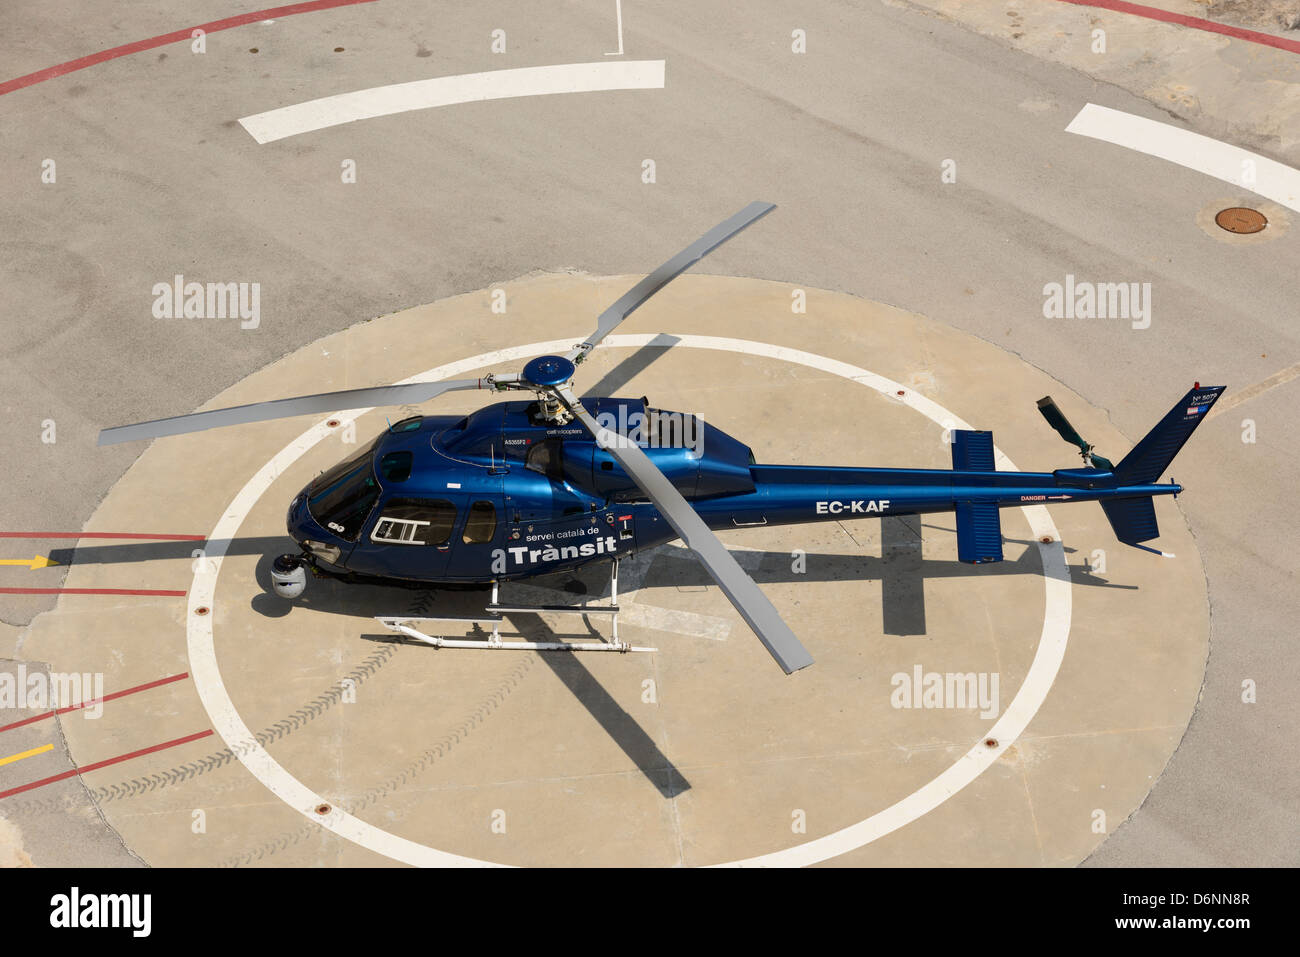 AS355 Ecureuil 2 (Twin Squirrel) helicopter made by Aérospatiale, (Eurocopter Group) Servei Català de Trànsit. CAThelicopters Stock Photo